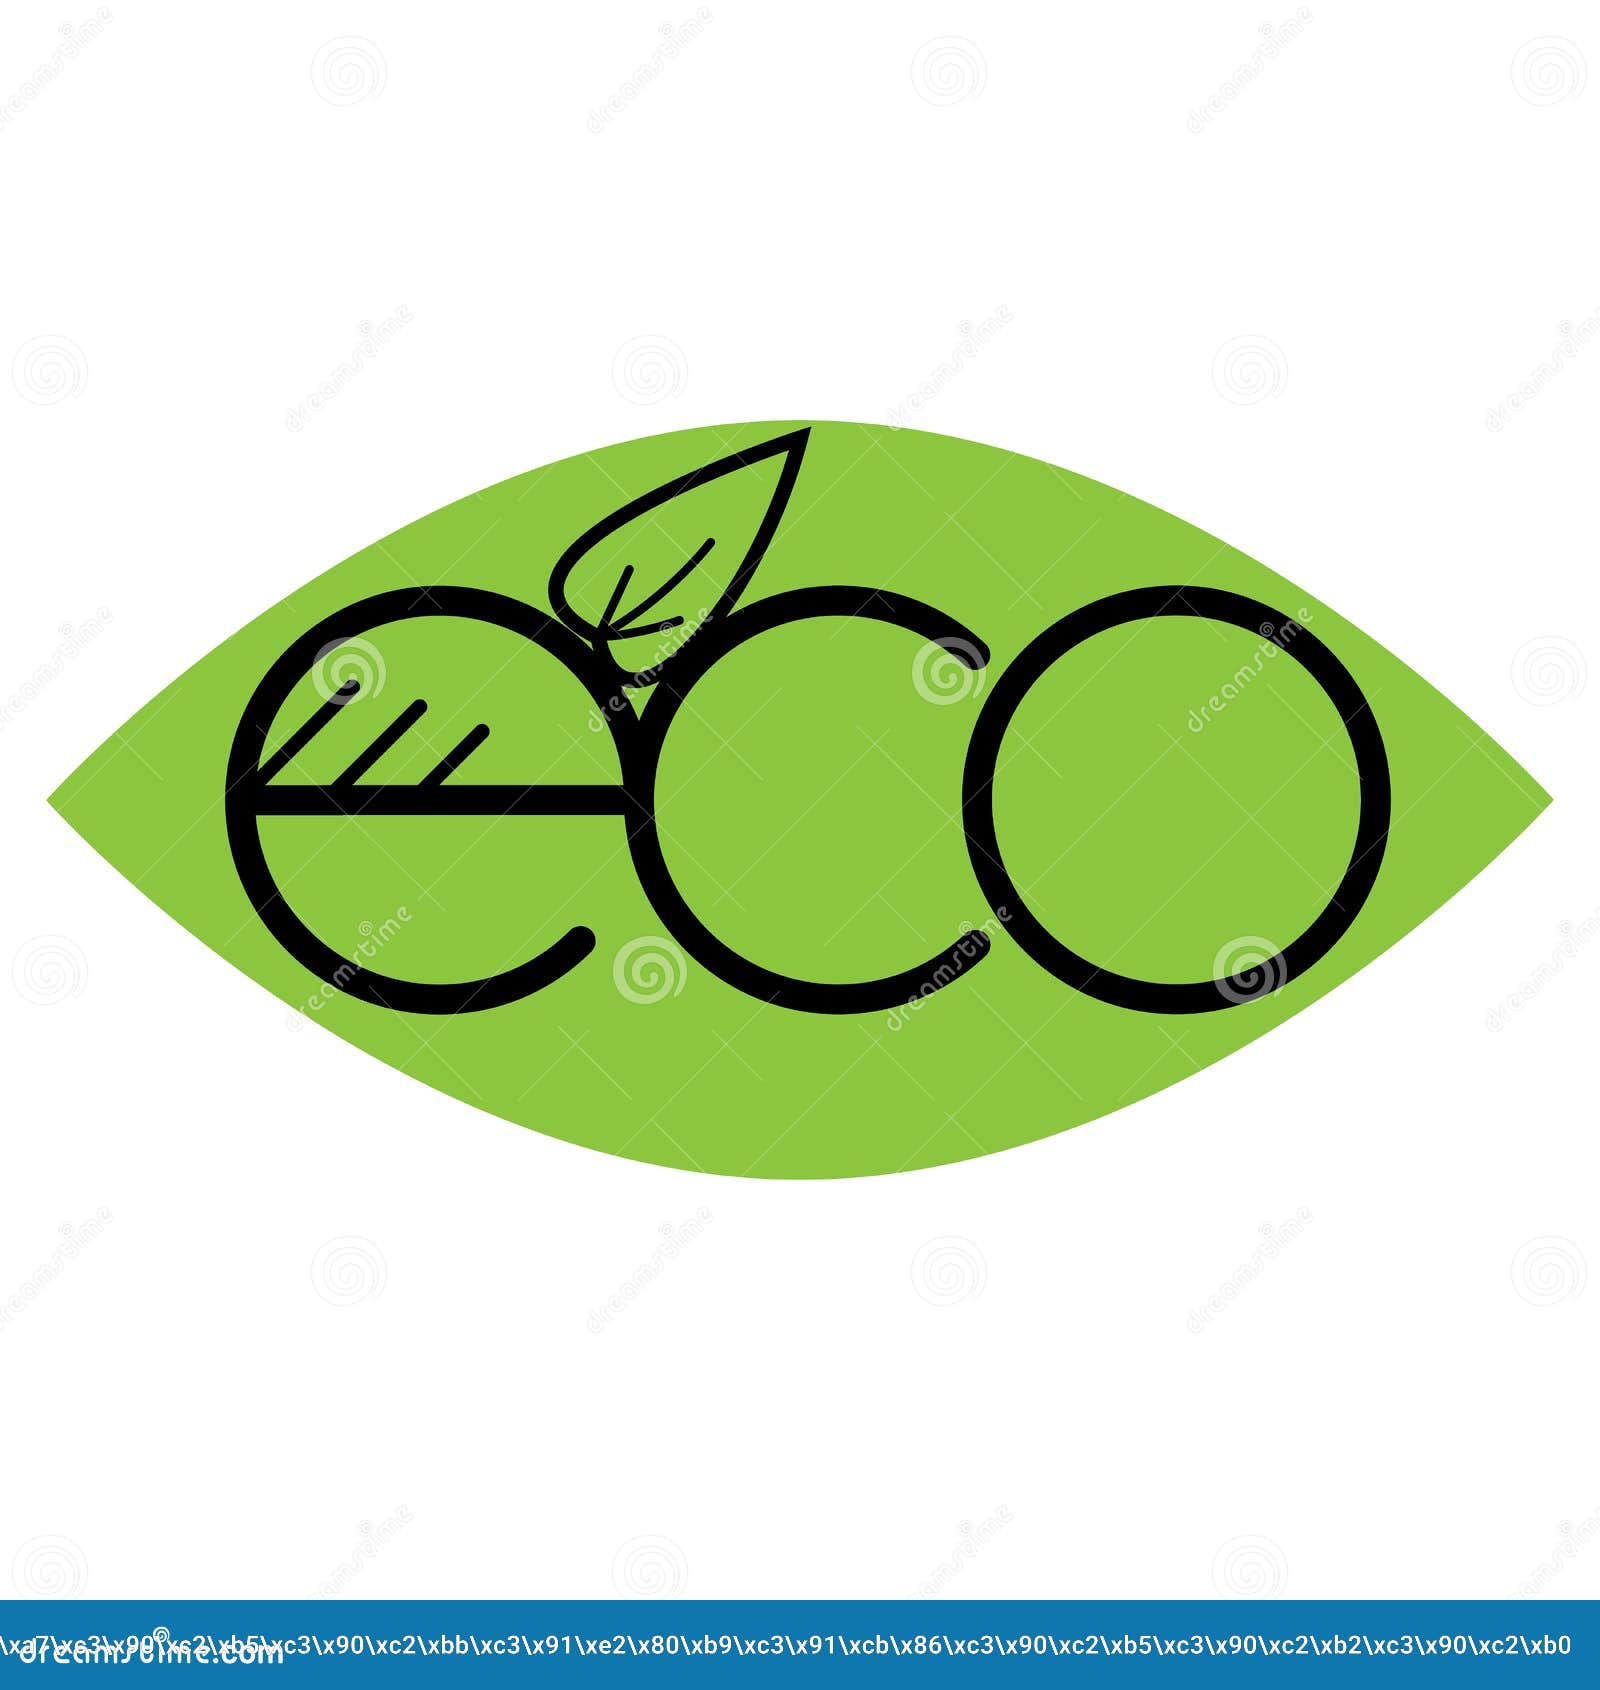 a set of icons in black and green for ations on the packaging of goods, ecology